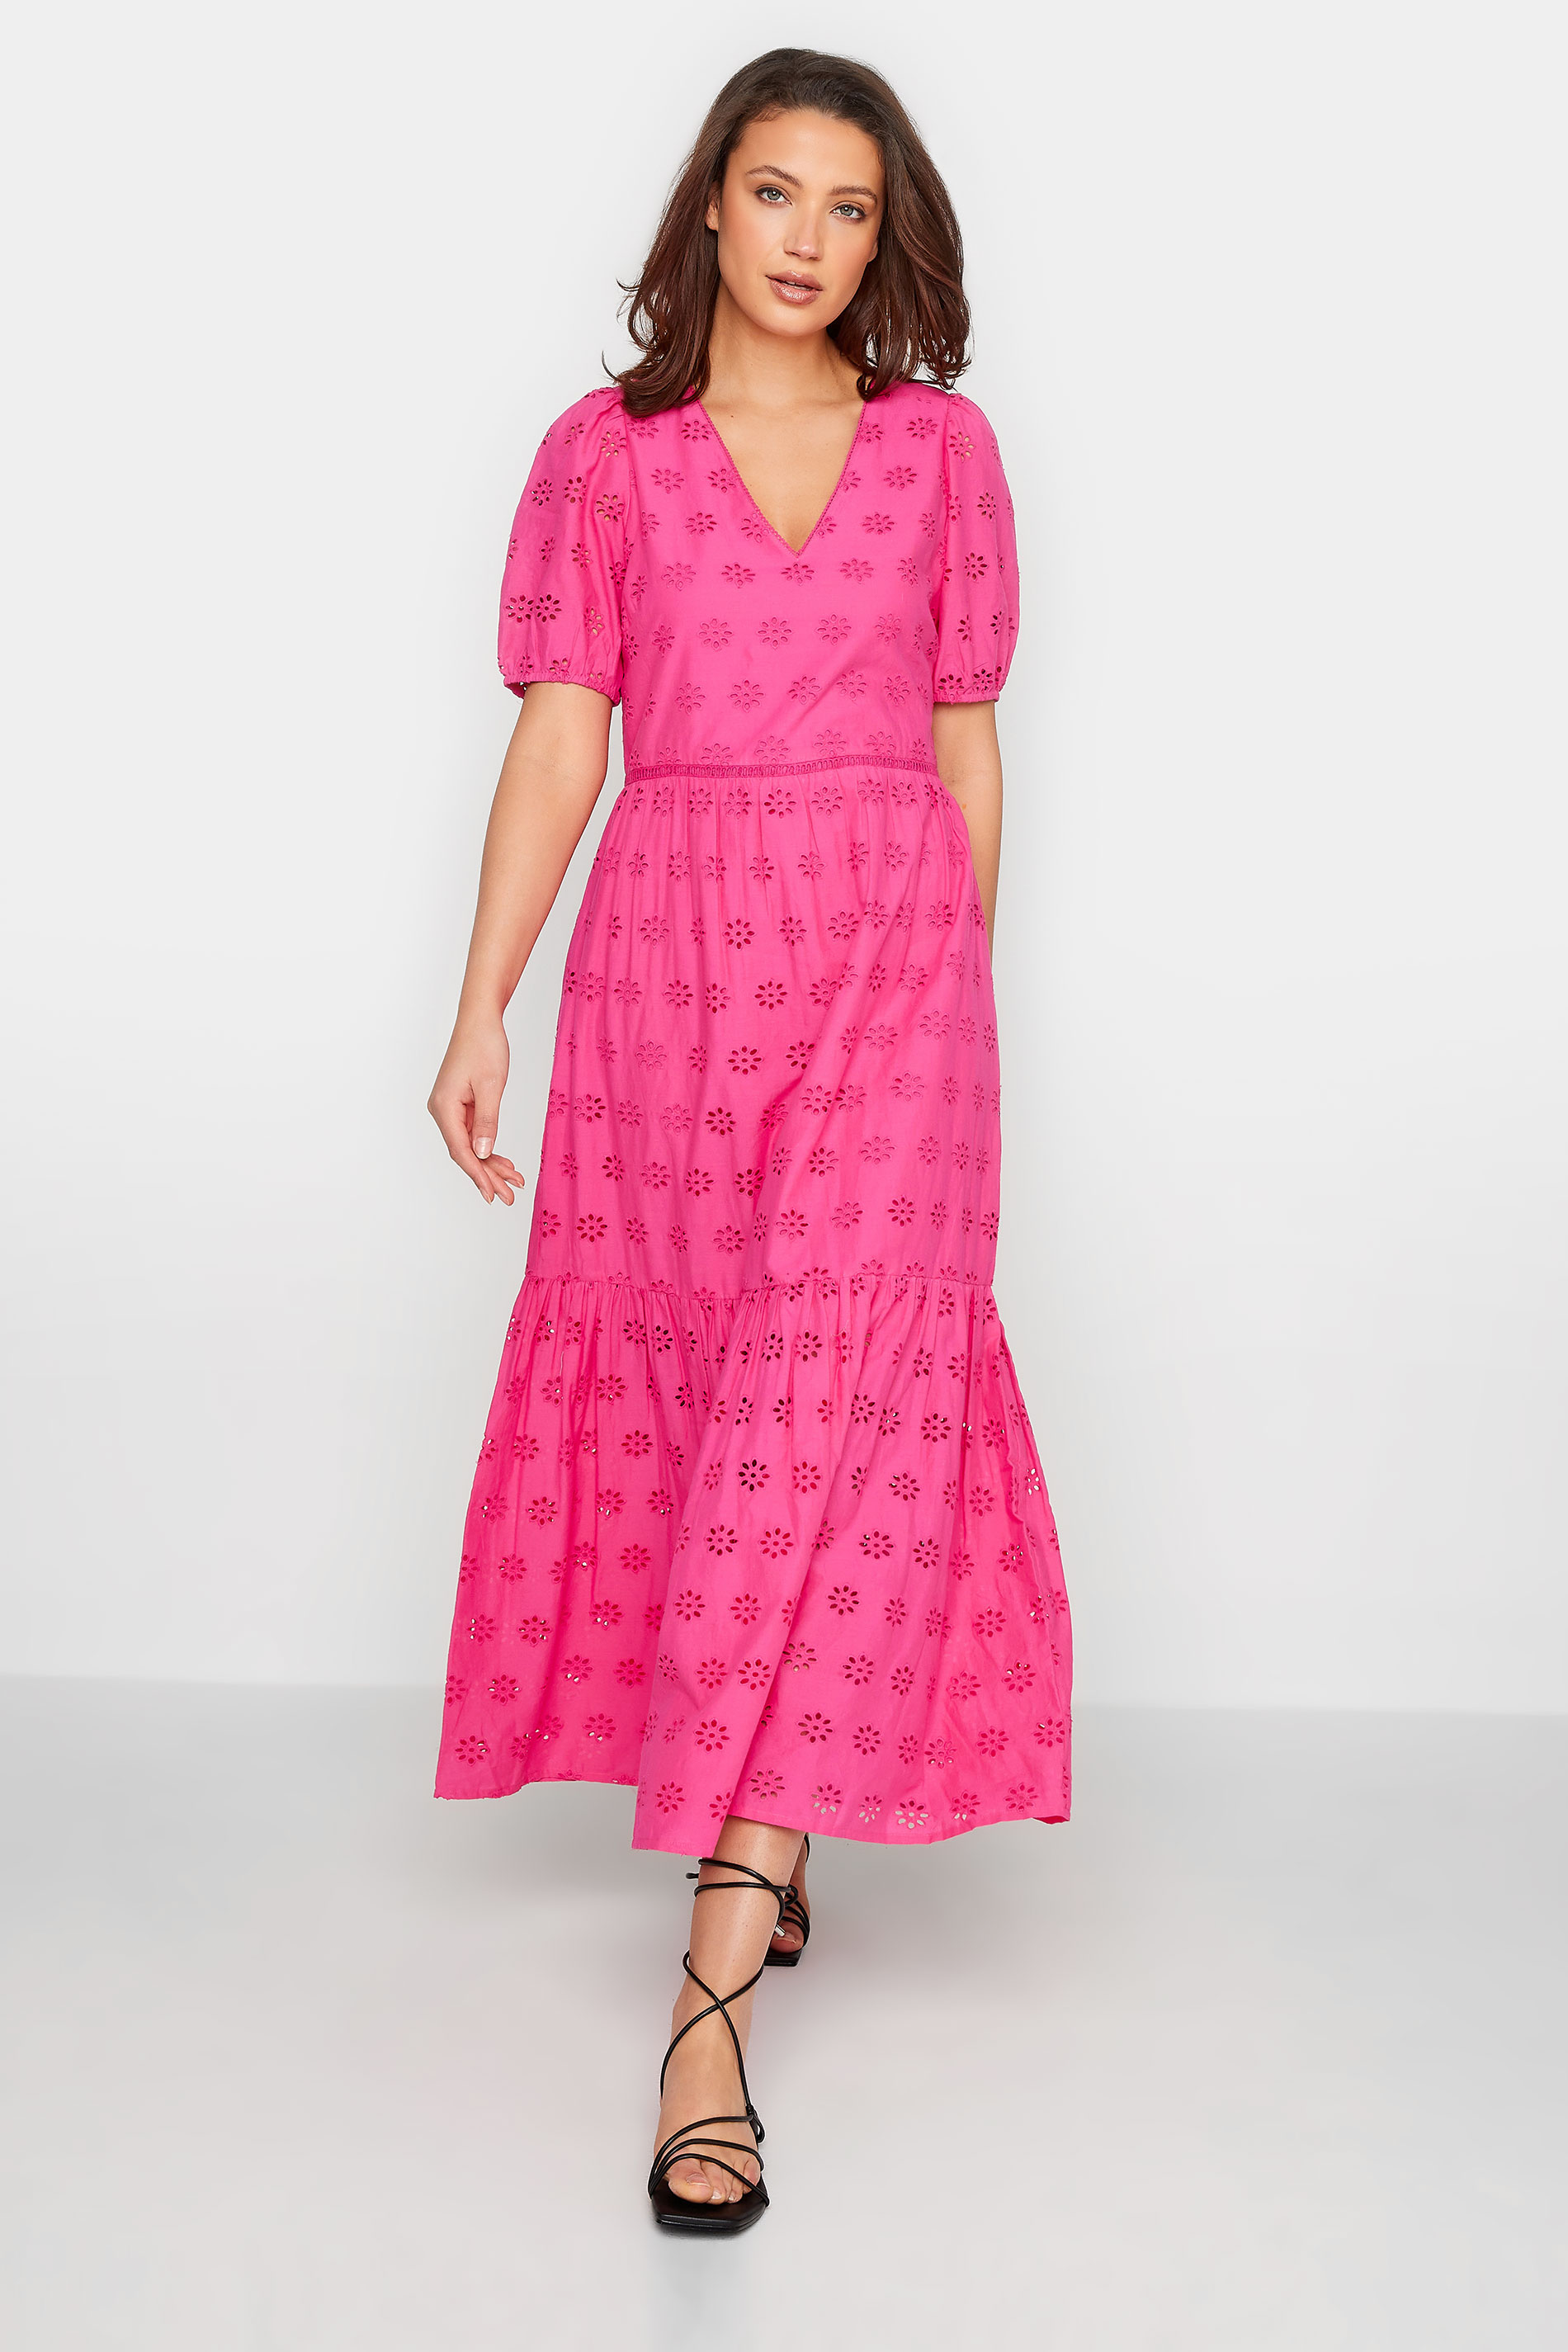 10 Must-Have Maxi Dresses For Tall Women | Long Tall Sally